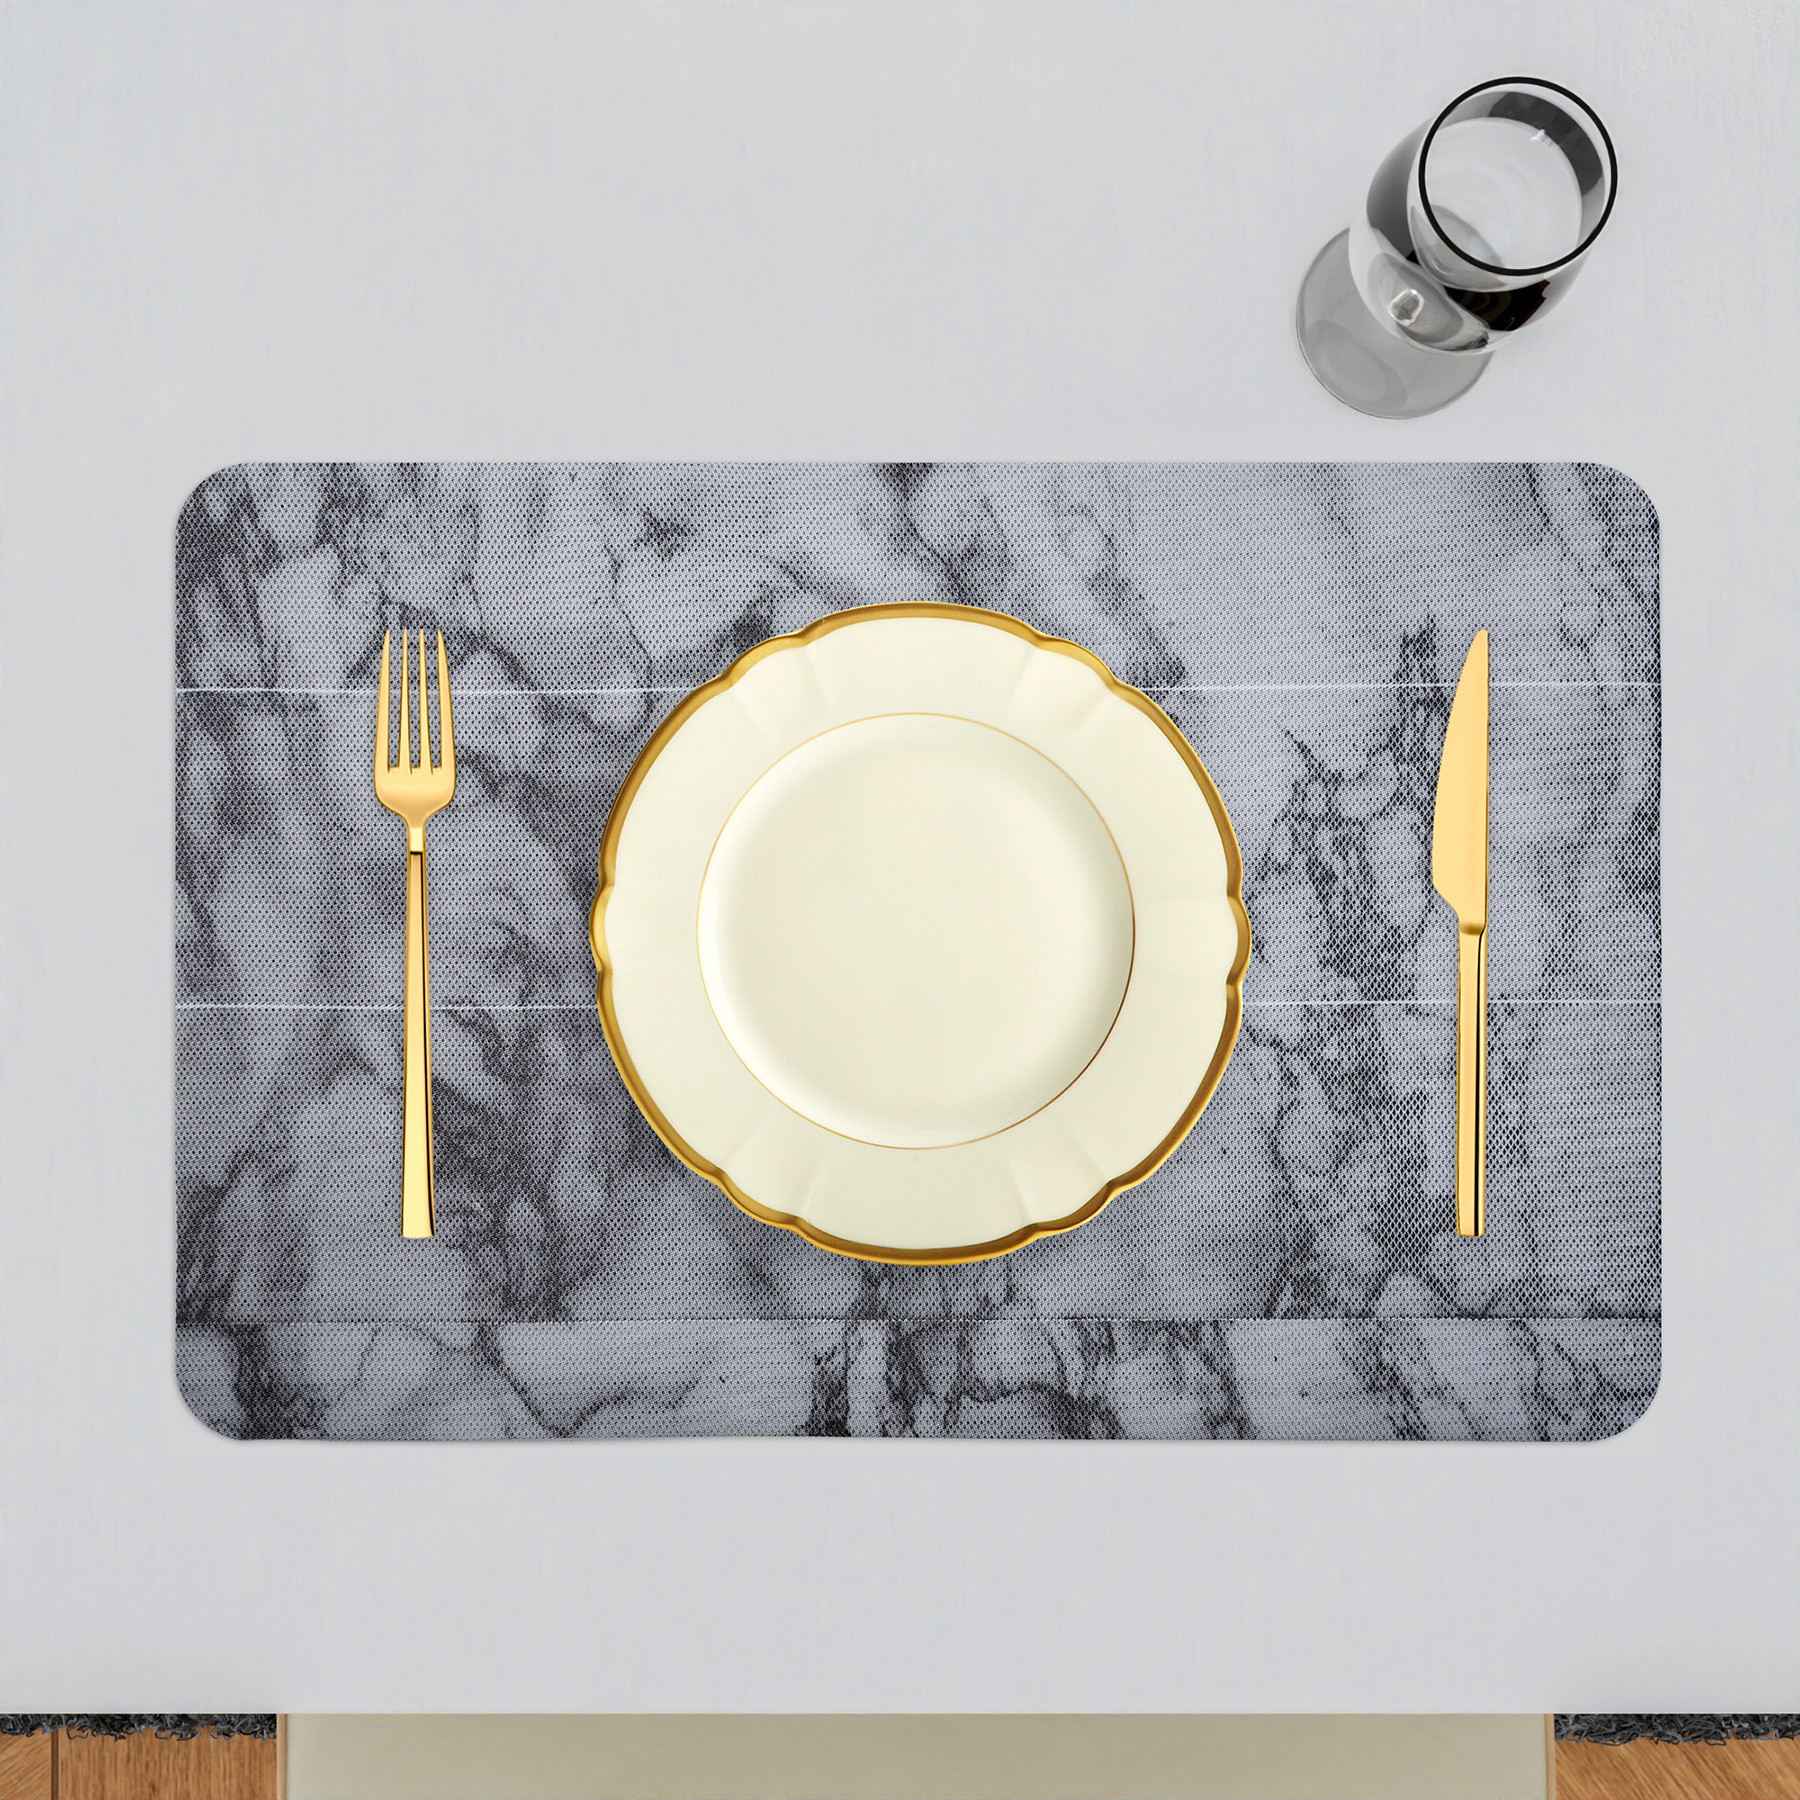 Kuber Industries Placemat | Placemats for Dining Room | Anti-Slip Table Mat Set | Placemats for Kitchen Table | Dining Table Placemats | Marble Placemat | 6 Piece Set | Gray